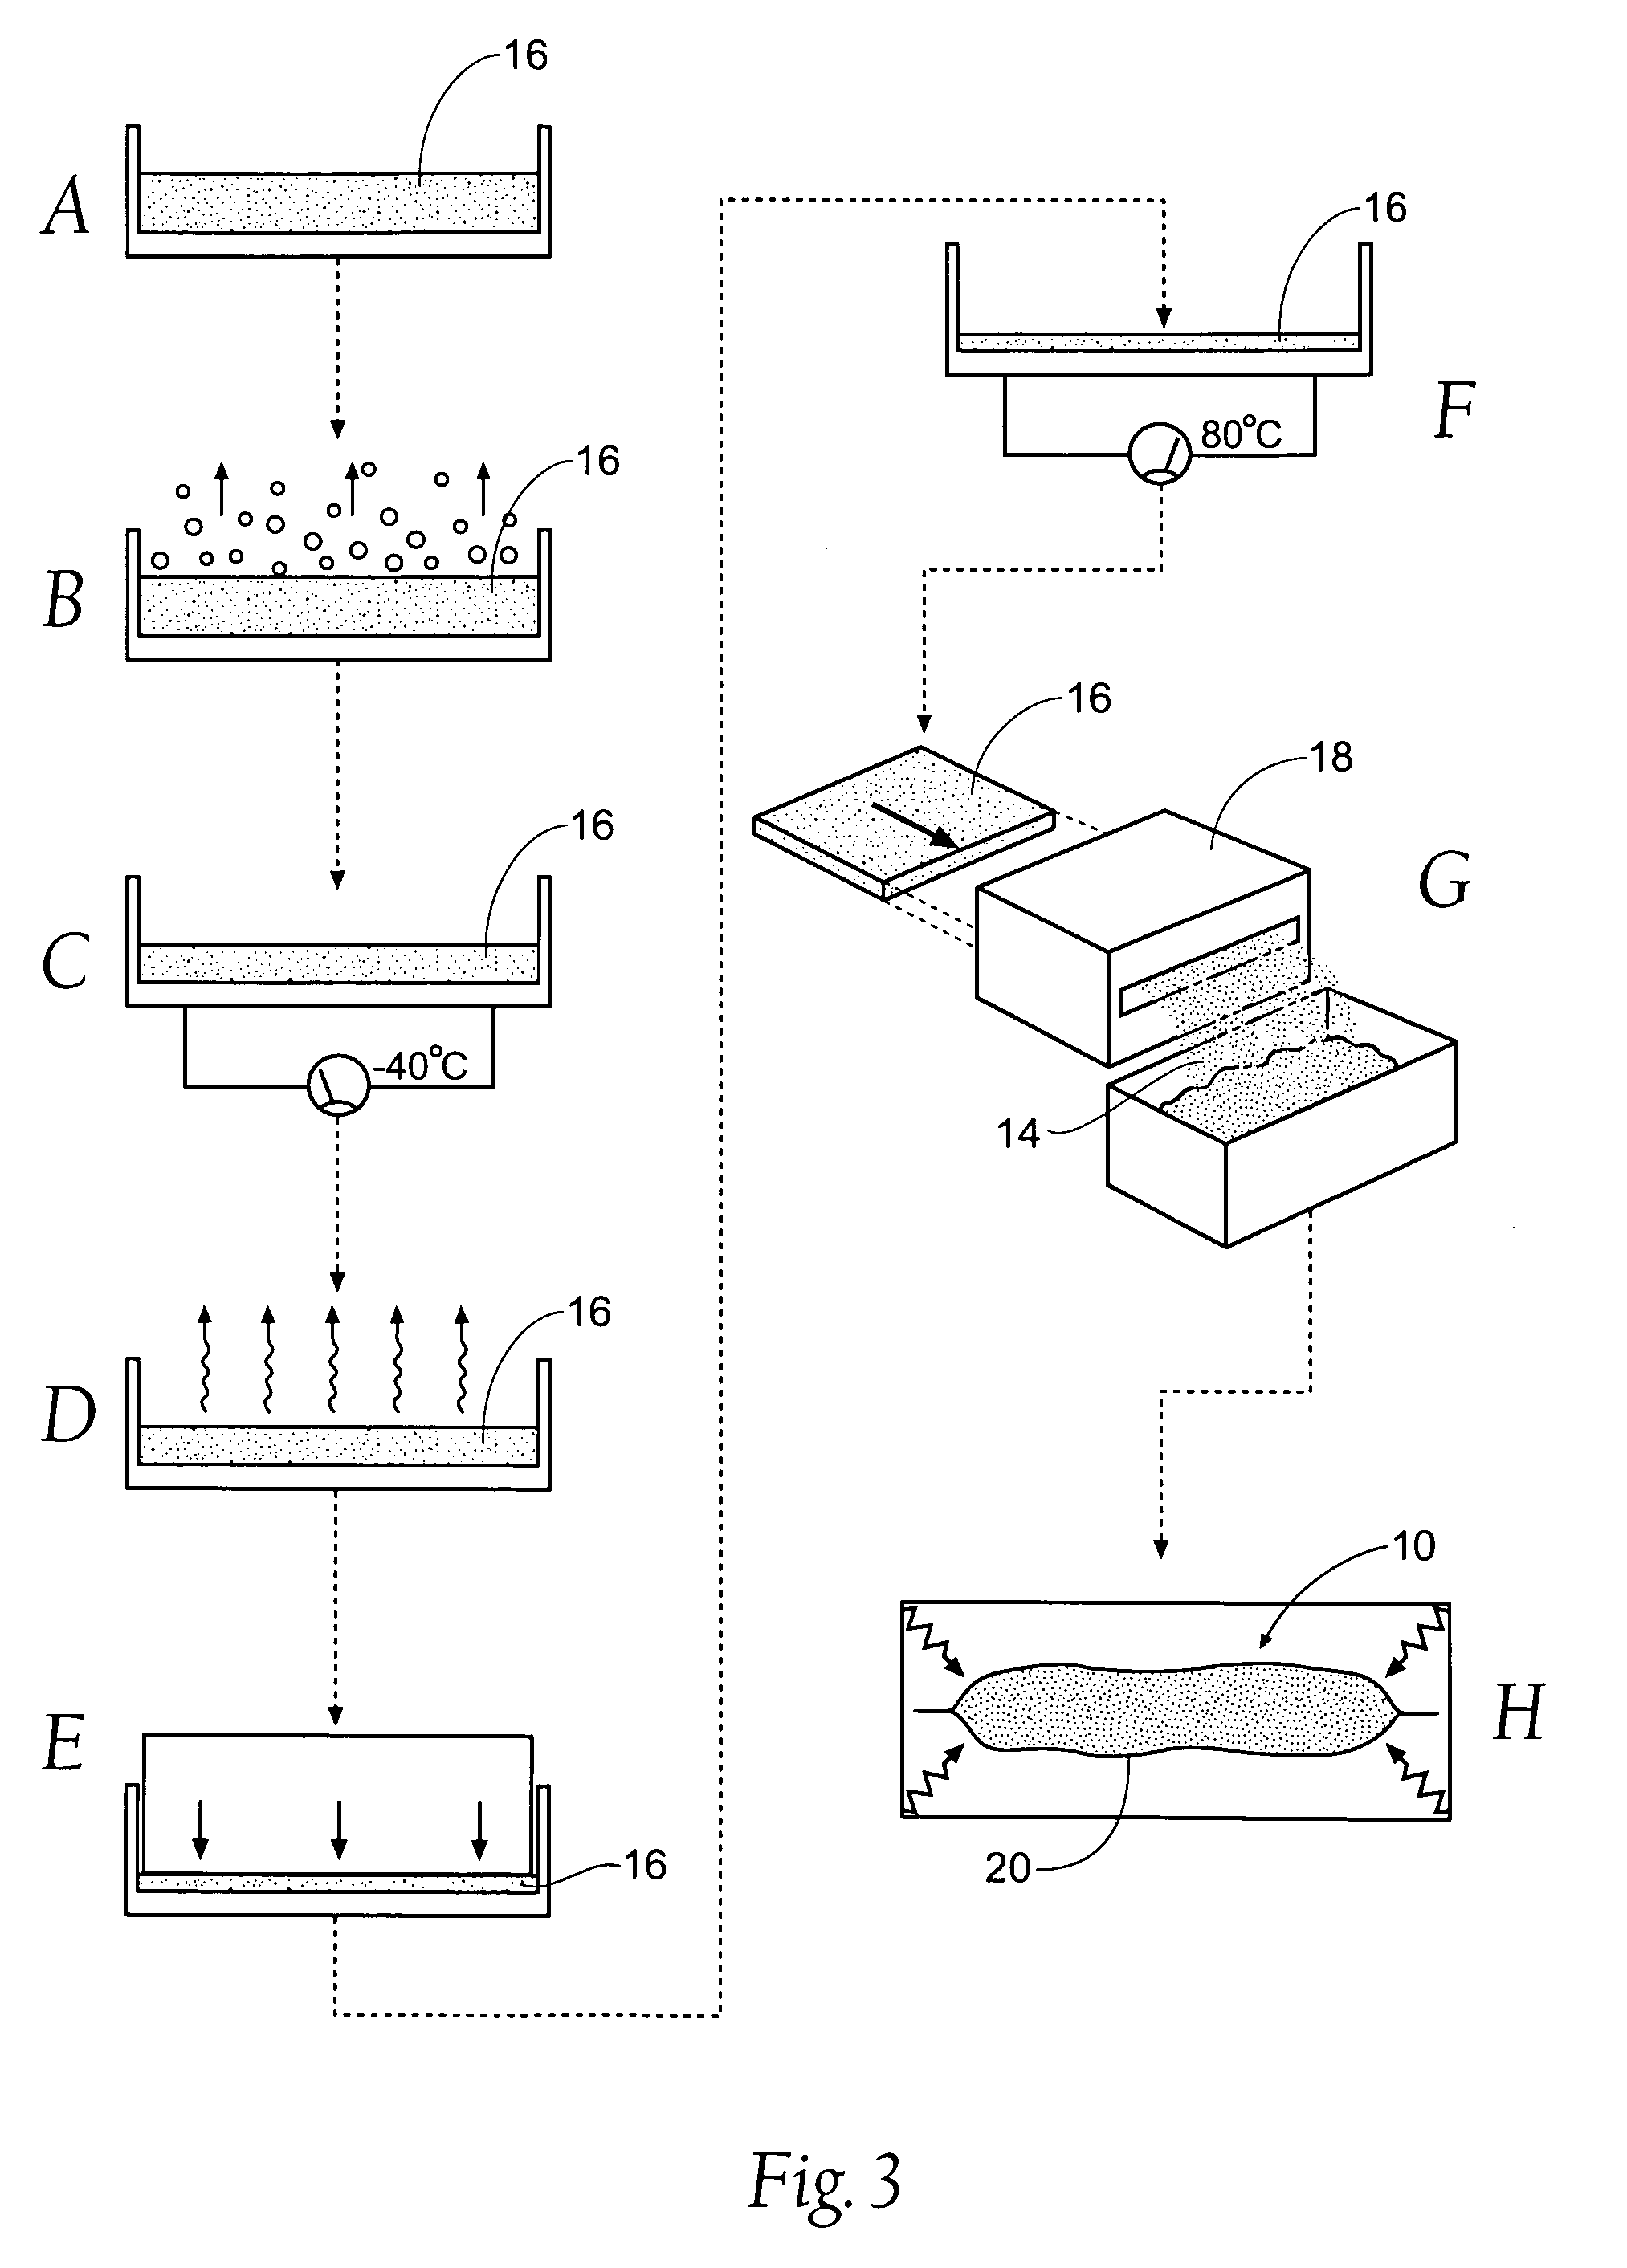 Hemostatic compositions, assemblies, systems, and methods employing particulate hemostatic agents formed from hydrophilic polymer foam such as chitosan